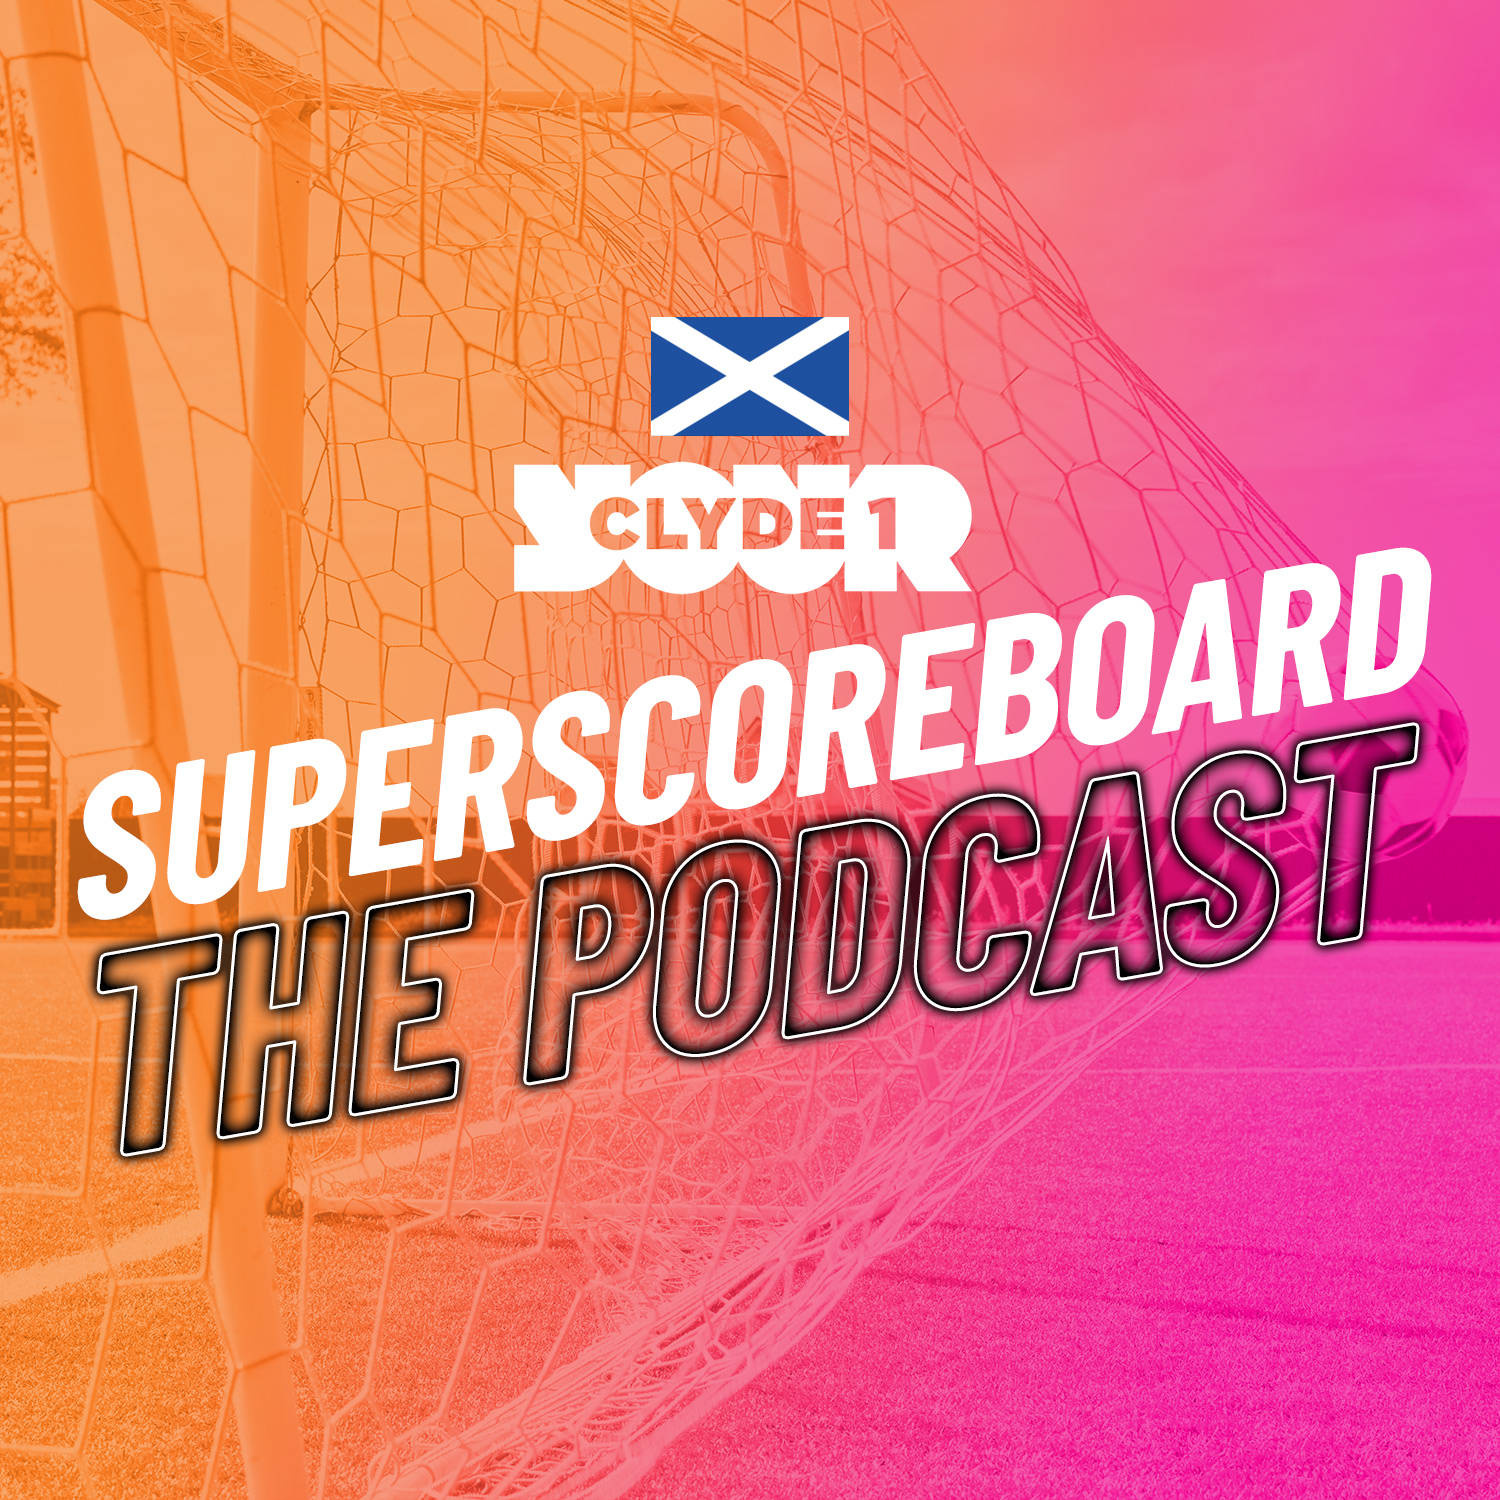 Friday 1st March Clyde 1 Superscoreboard